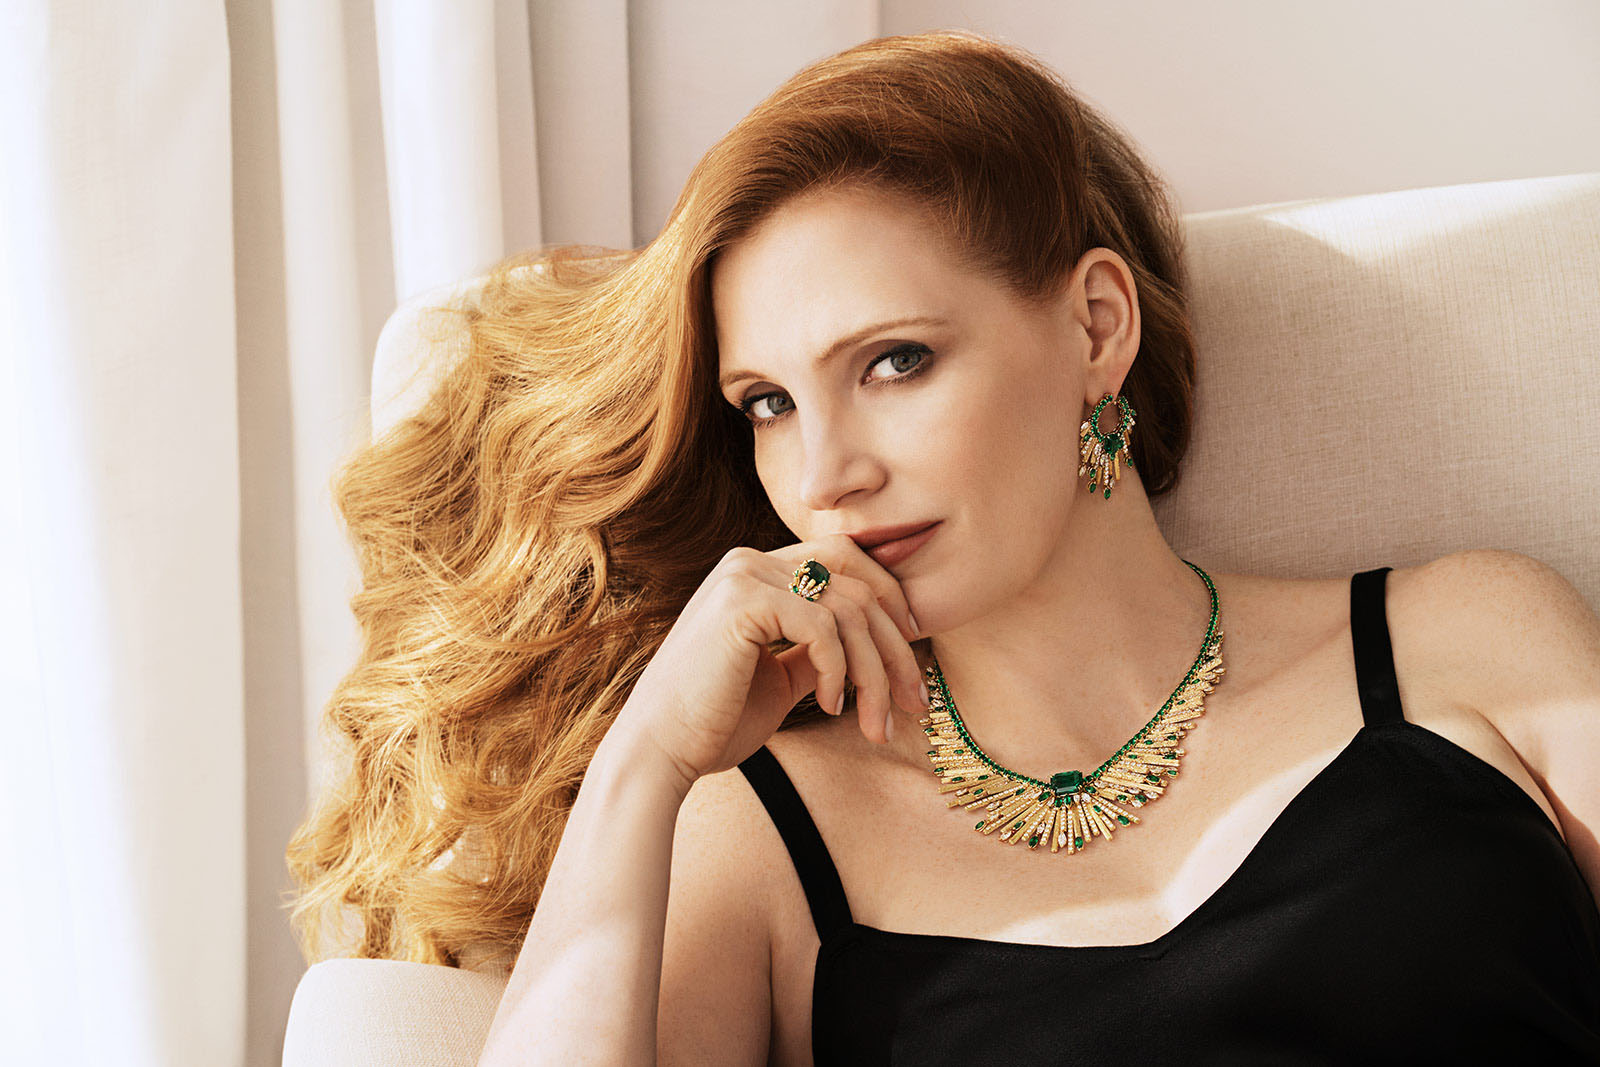 Piaget ambassador Jessica Chastain in the 'Midnight Sun' necklace, earrings and ring from the 'Sunlight Escape' collection in Colombian emeralds, diamonds and yellow gold